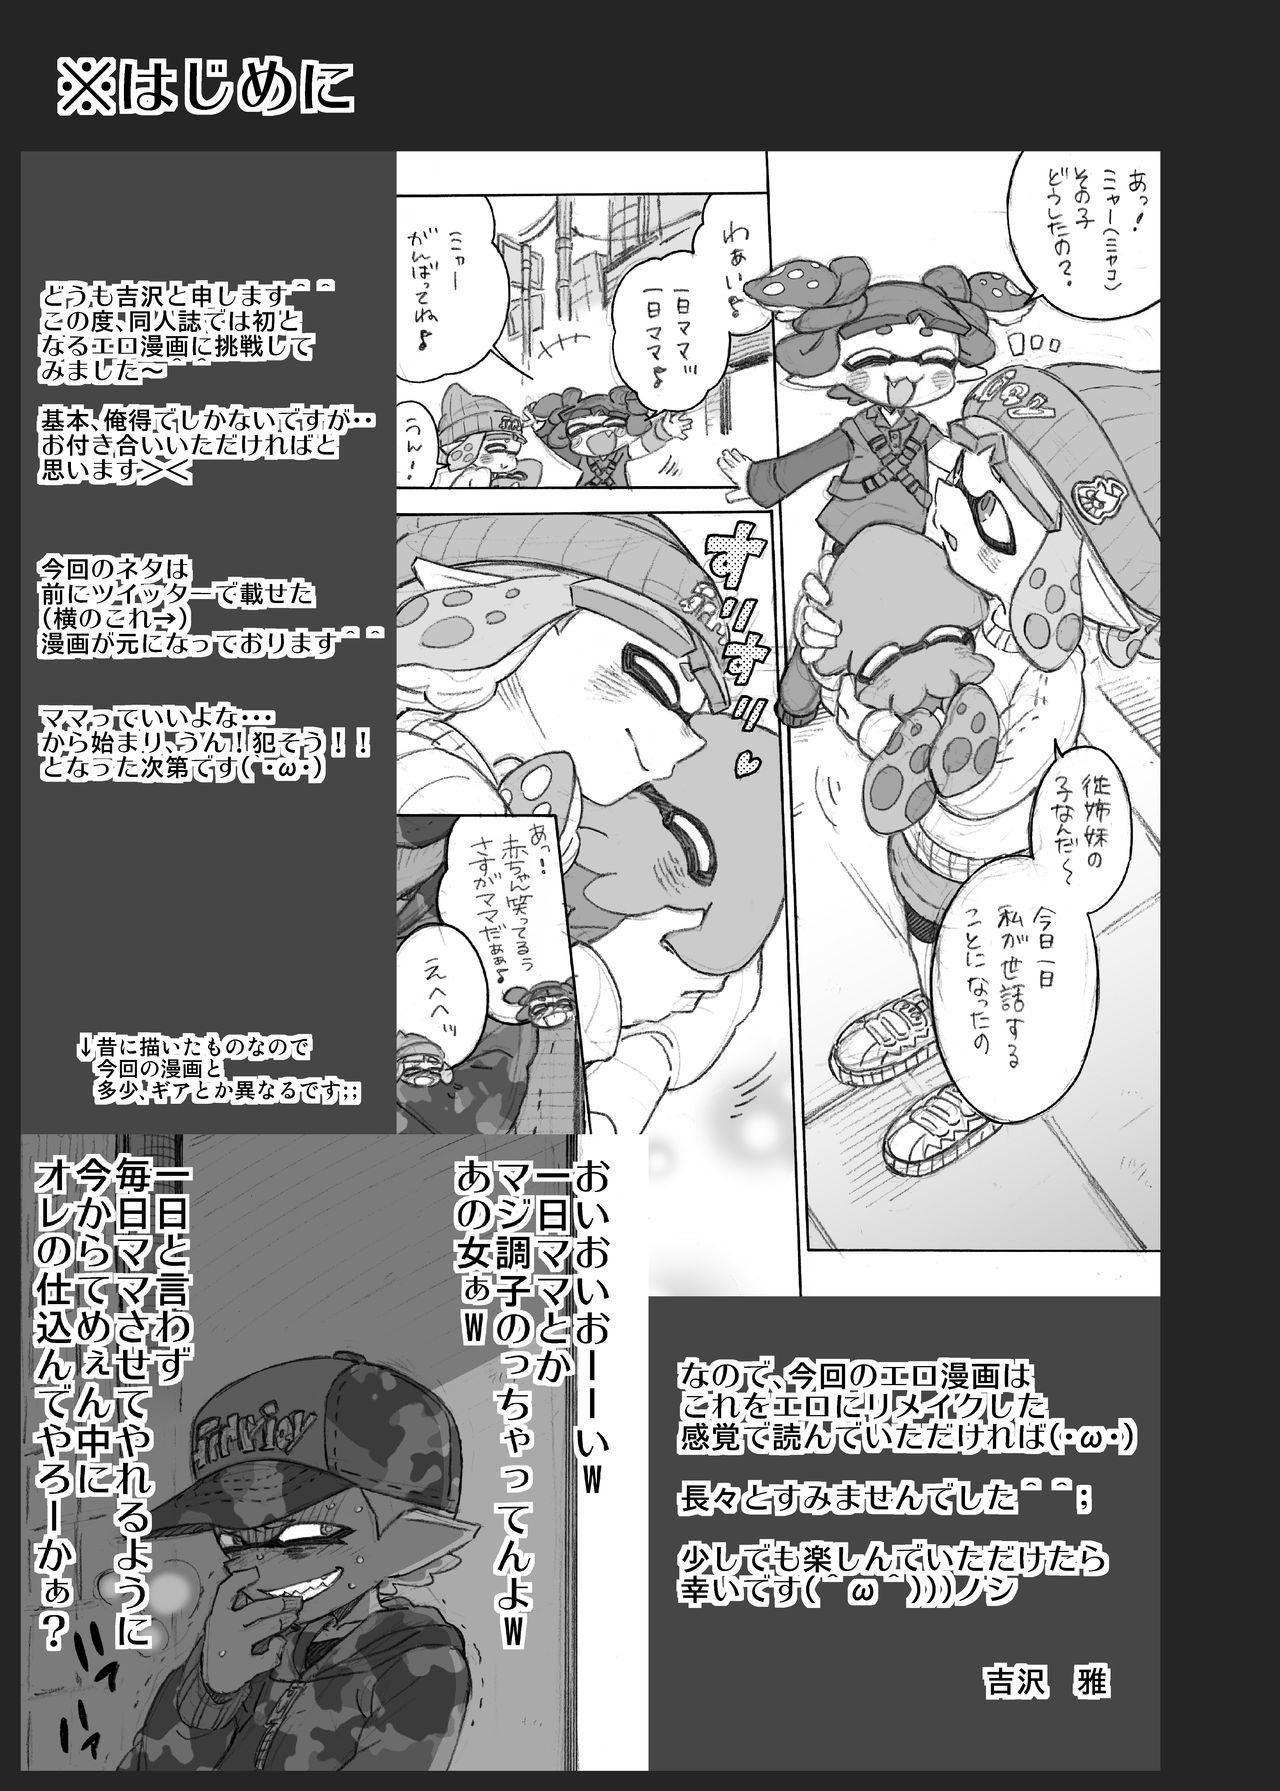 Freaky Let's make that anxious daughter a mama - Splatoon Peitos - Page 2